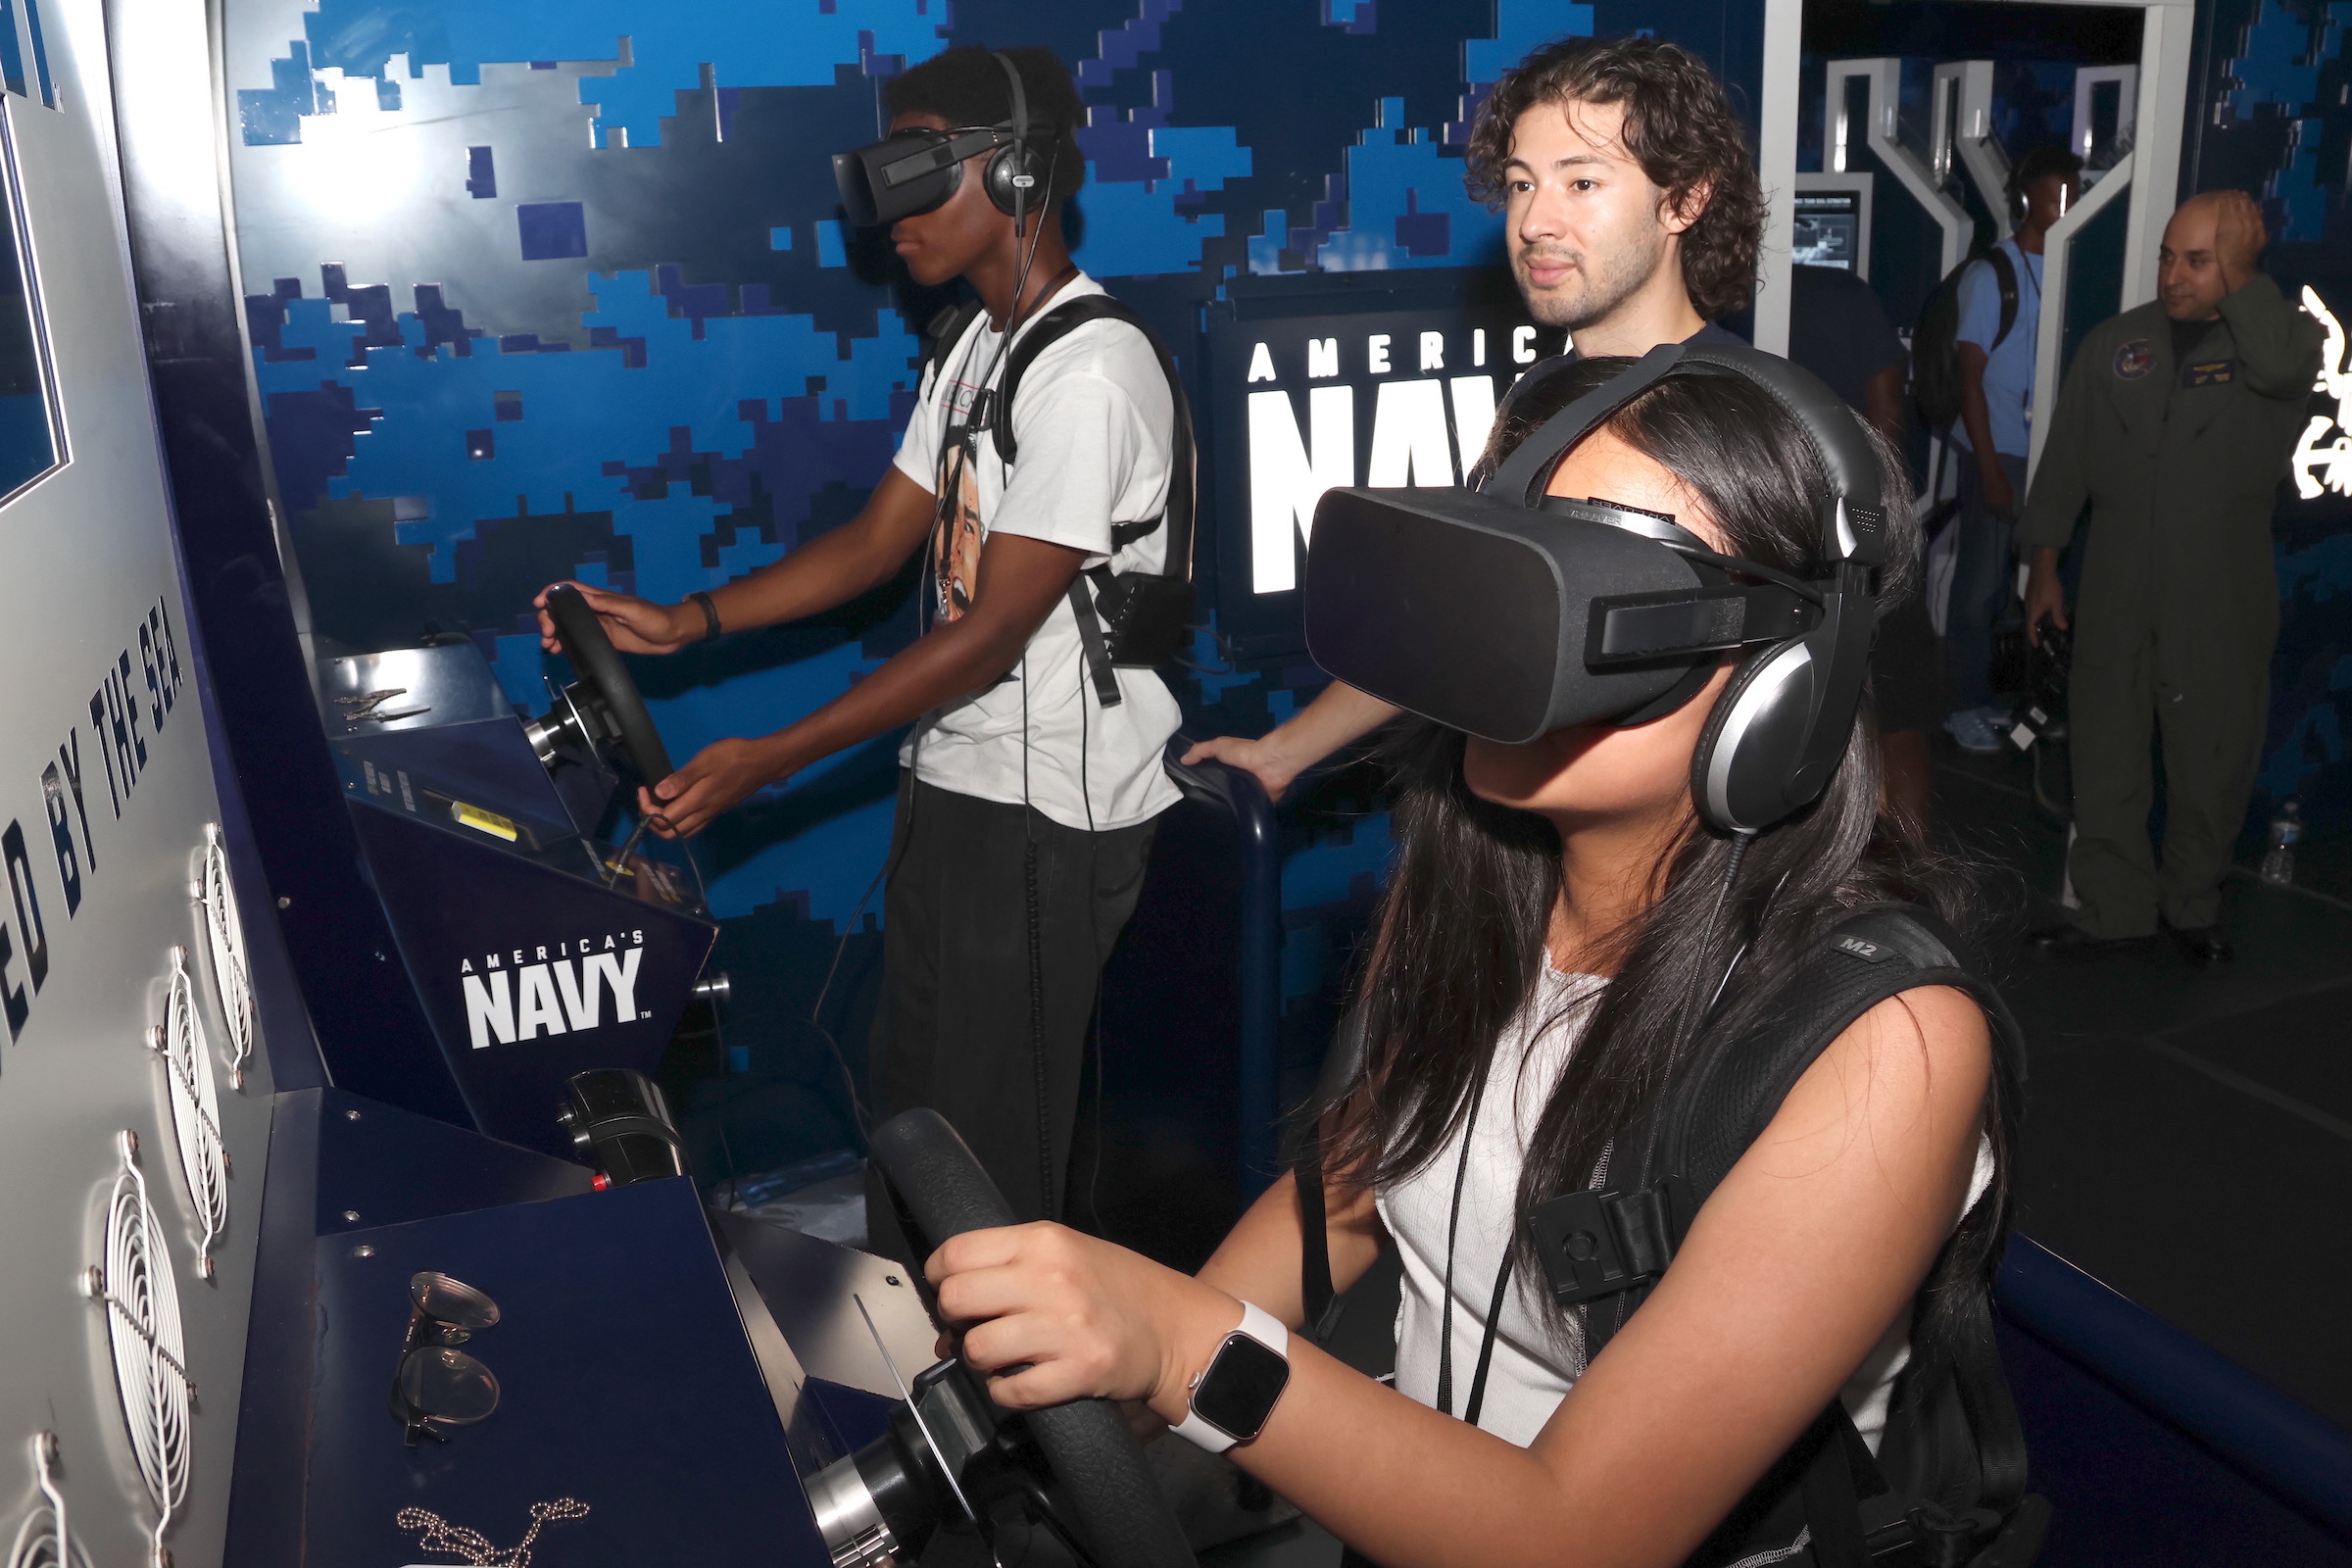 Robert E. Lee High School students work with the Navy’s virtual reality equipment